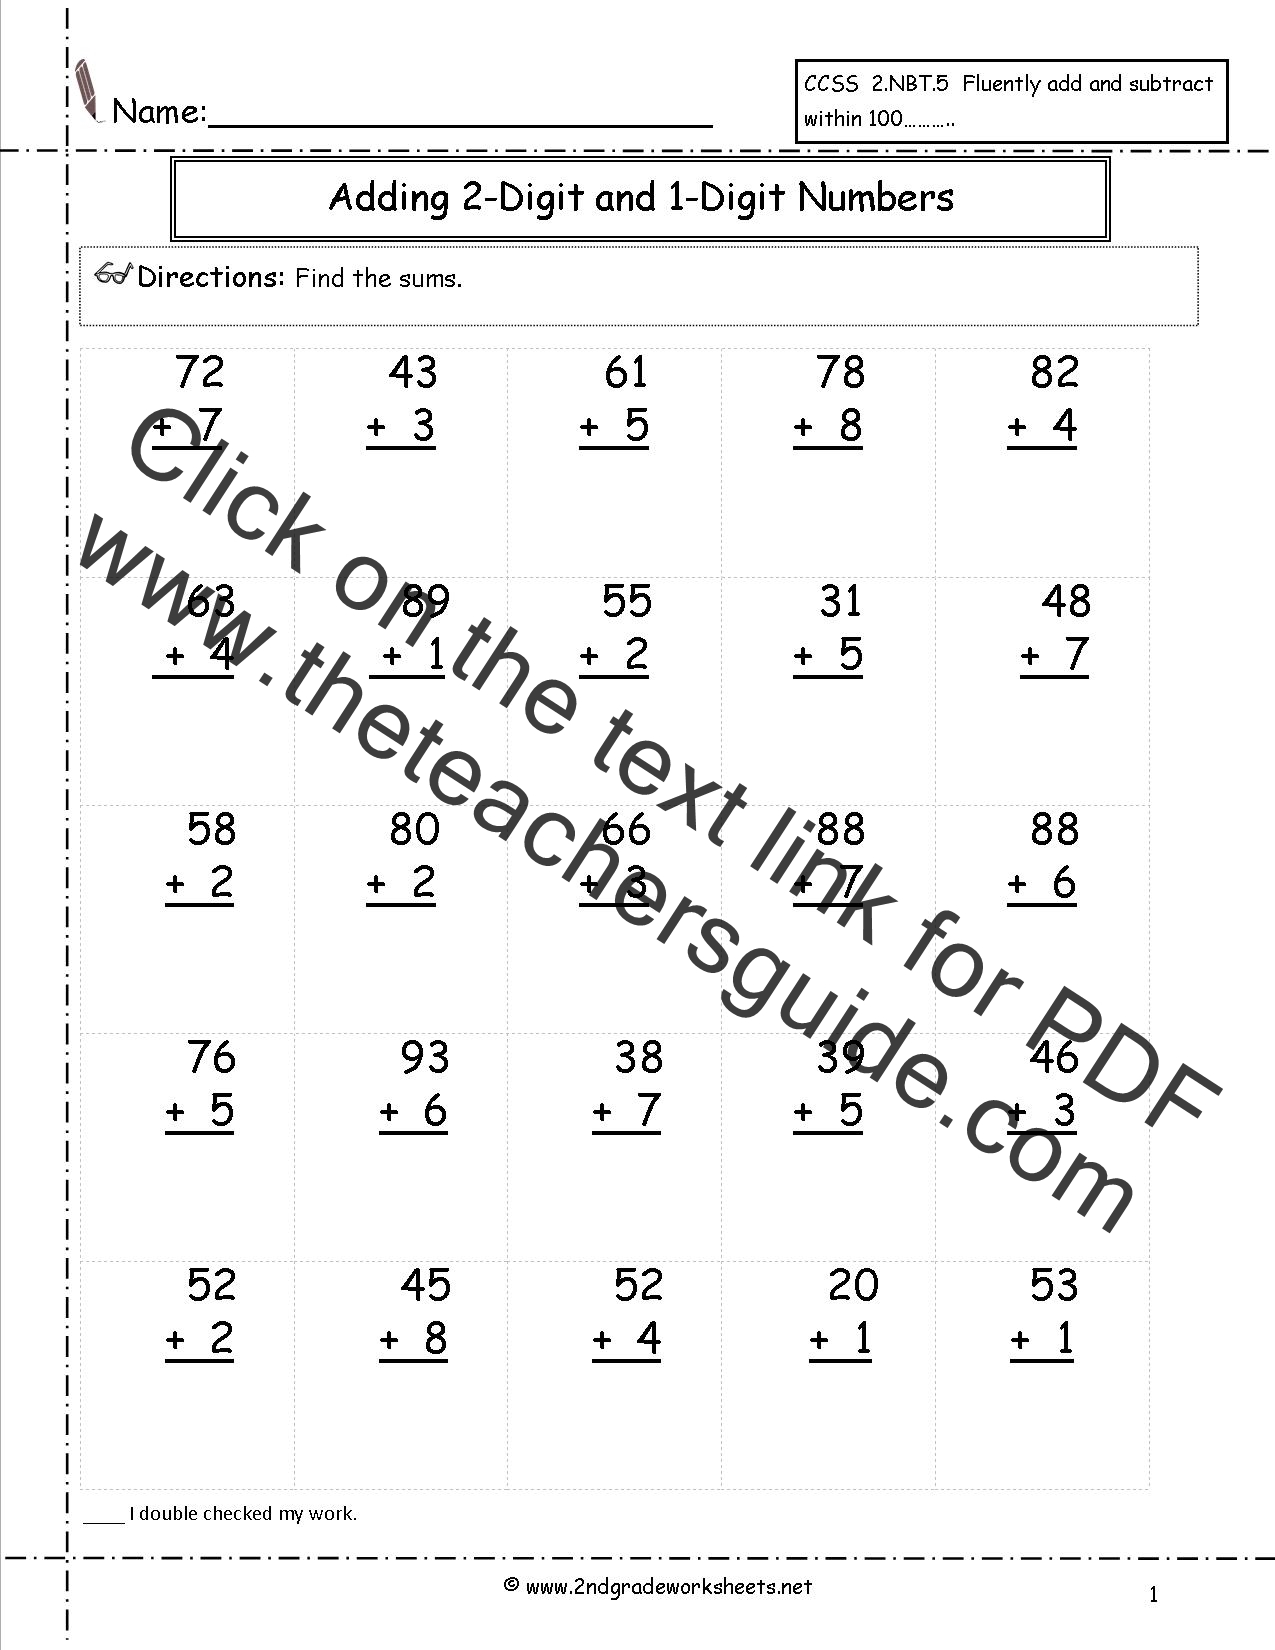 adding-one-digit-numbers-and-two-digit-numbers-turtle-diary-worksheet